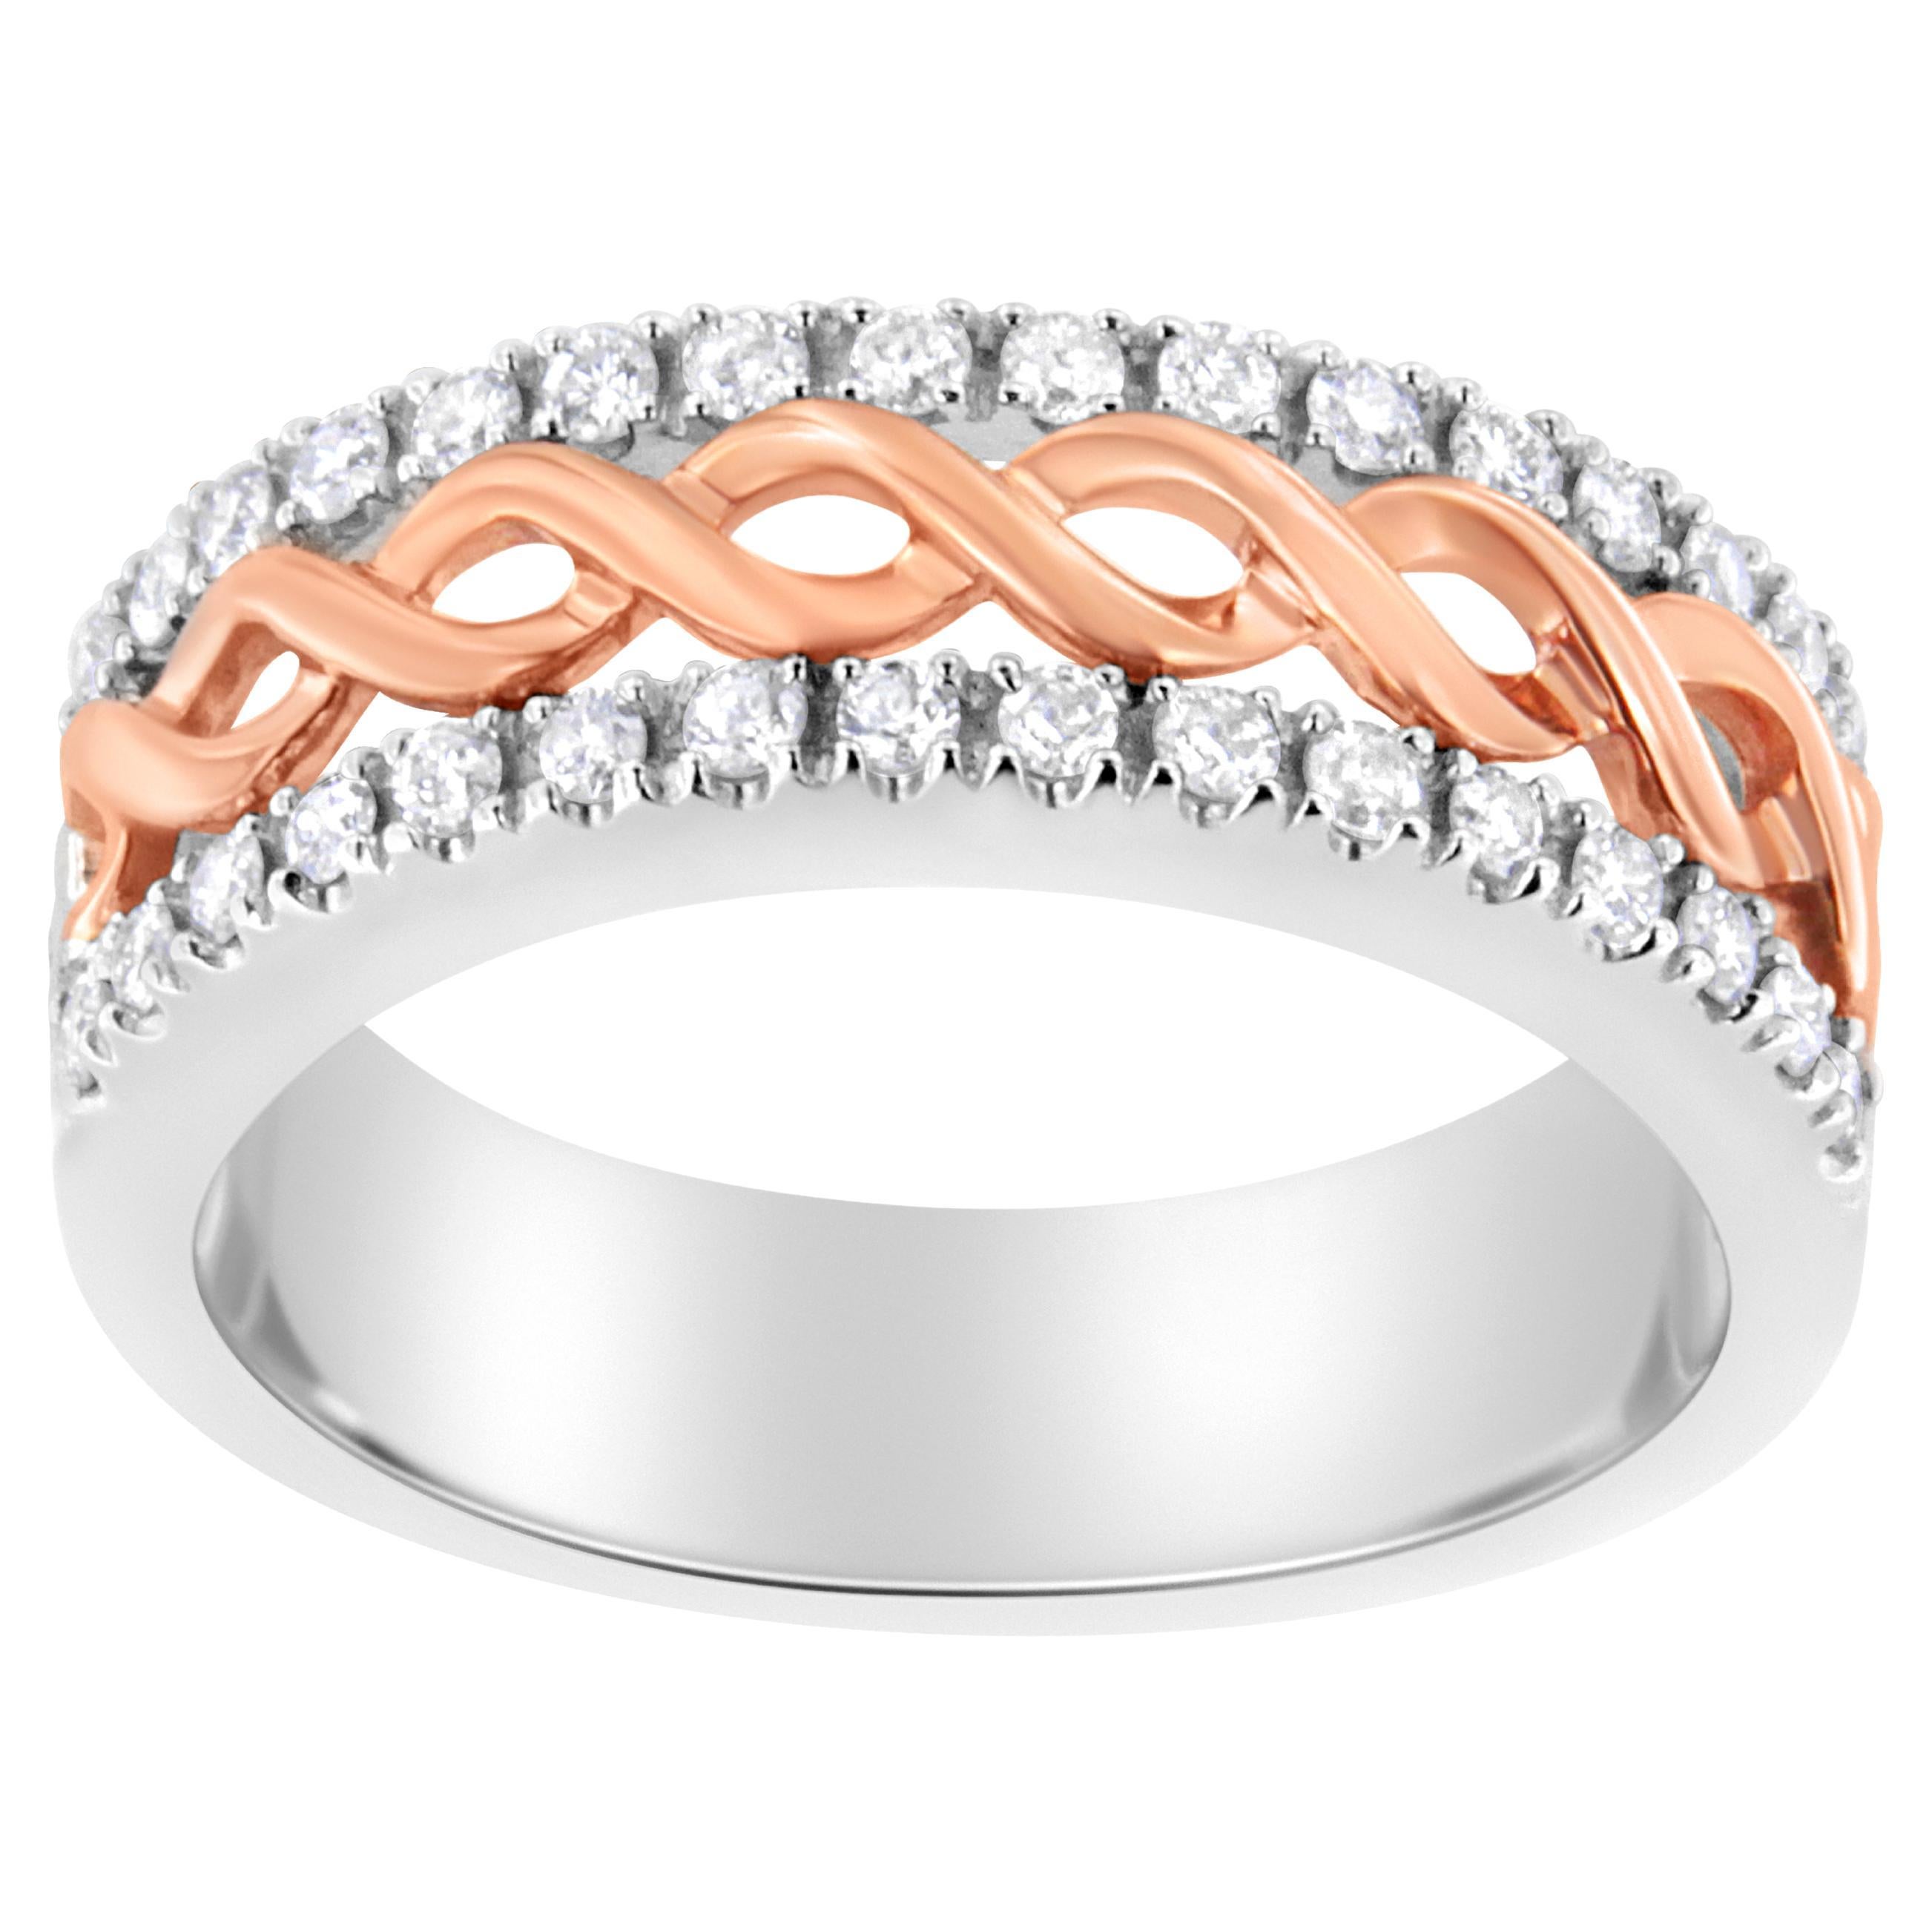 10K Rose Gold 1/3 carat Diamonds Stackable Eternity Band Ring size 5 